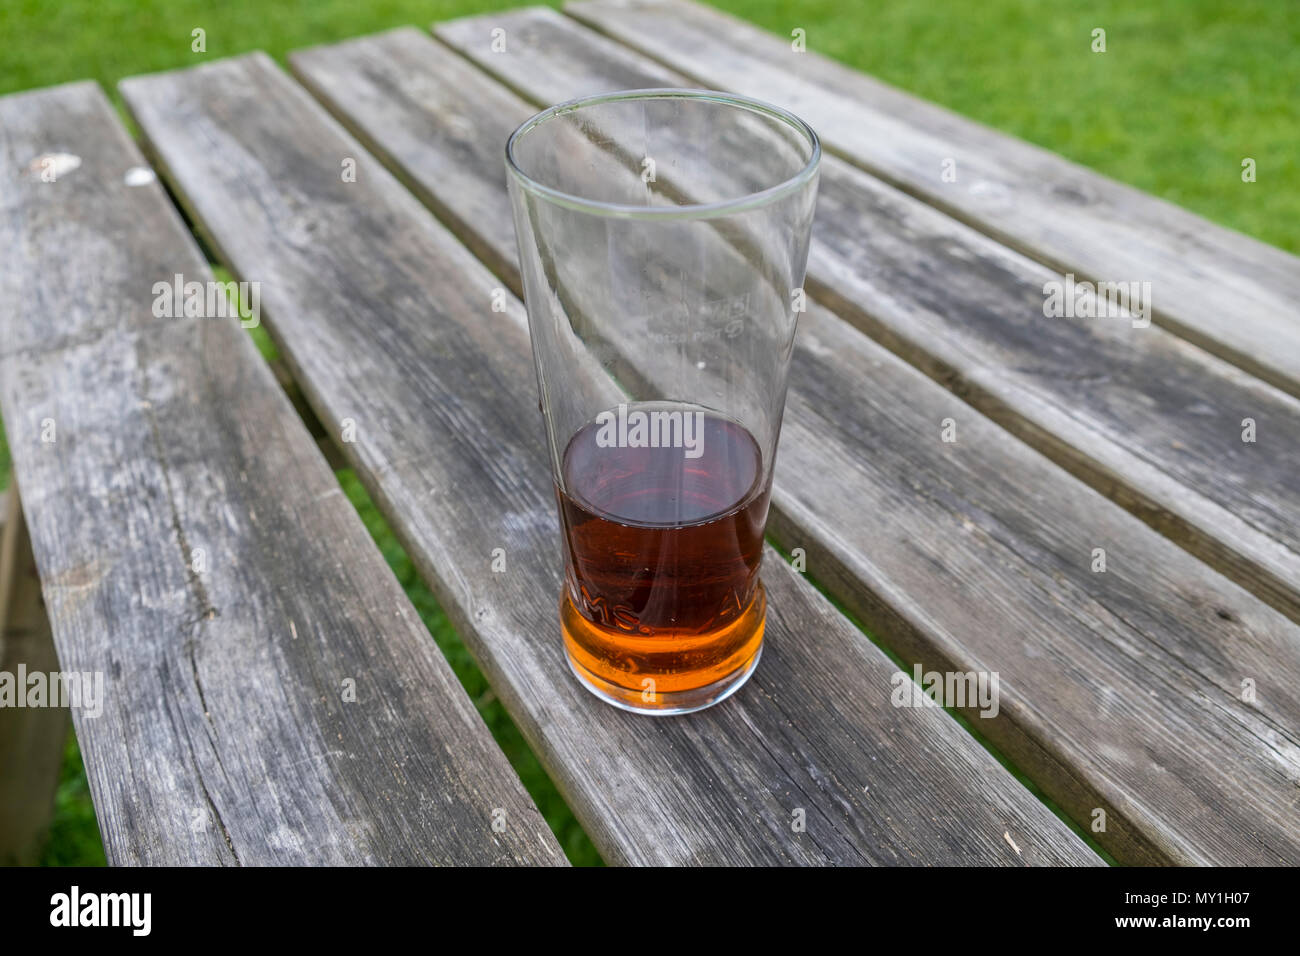 Half full pint of Adnams bitter on a pub table. Showing glass half full or glass half empty. Suffolk,UK. Stock Photo